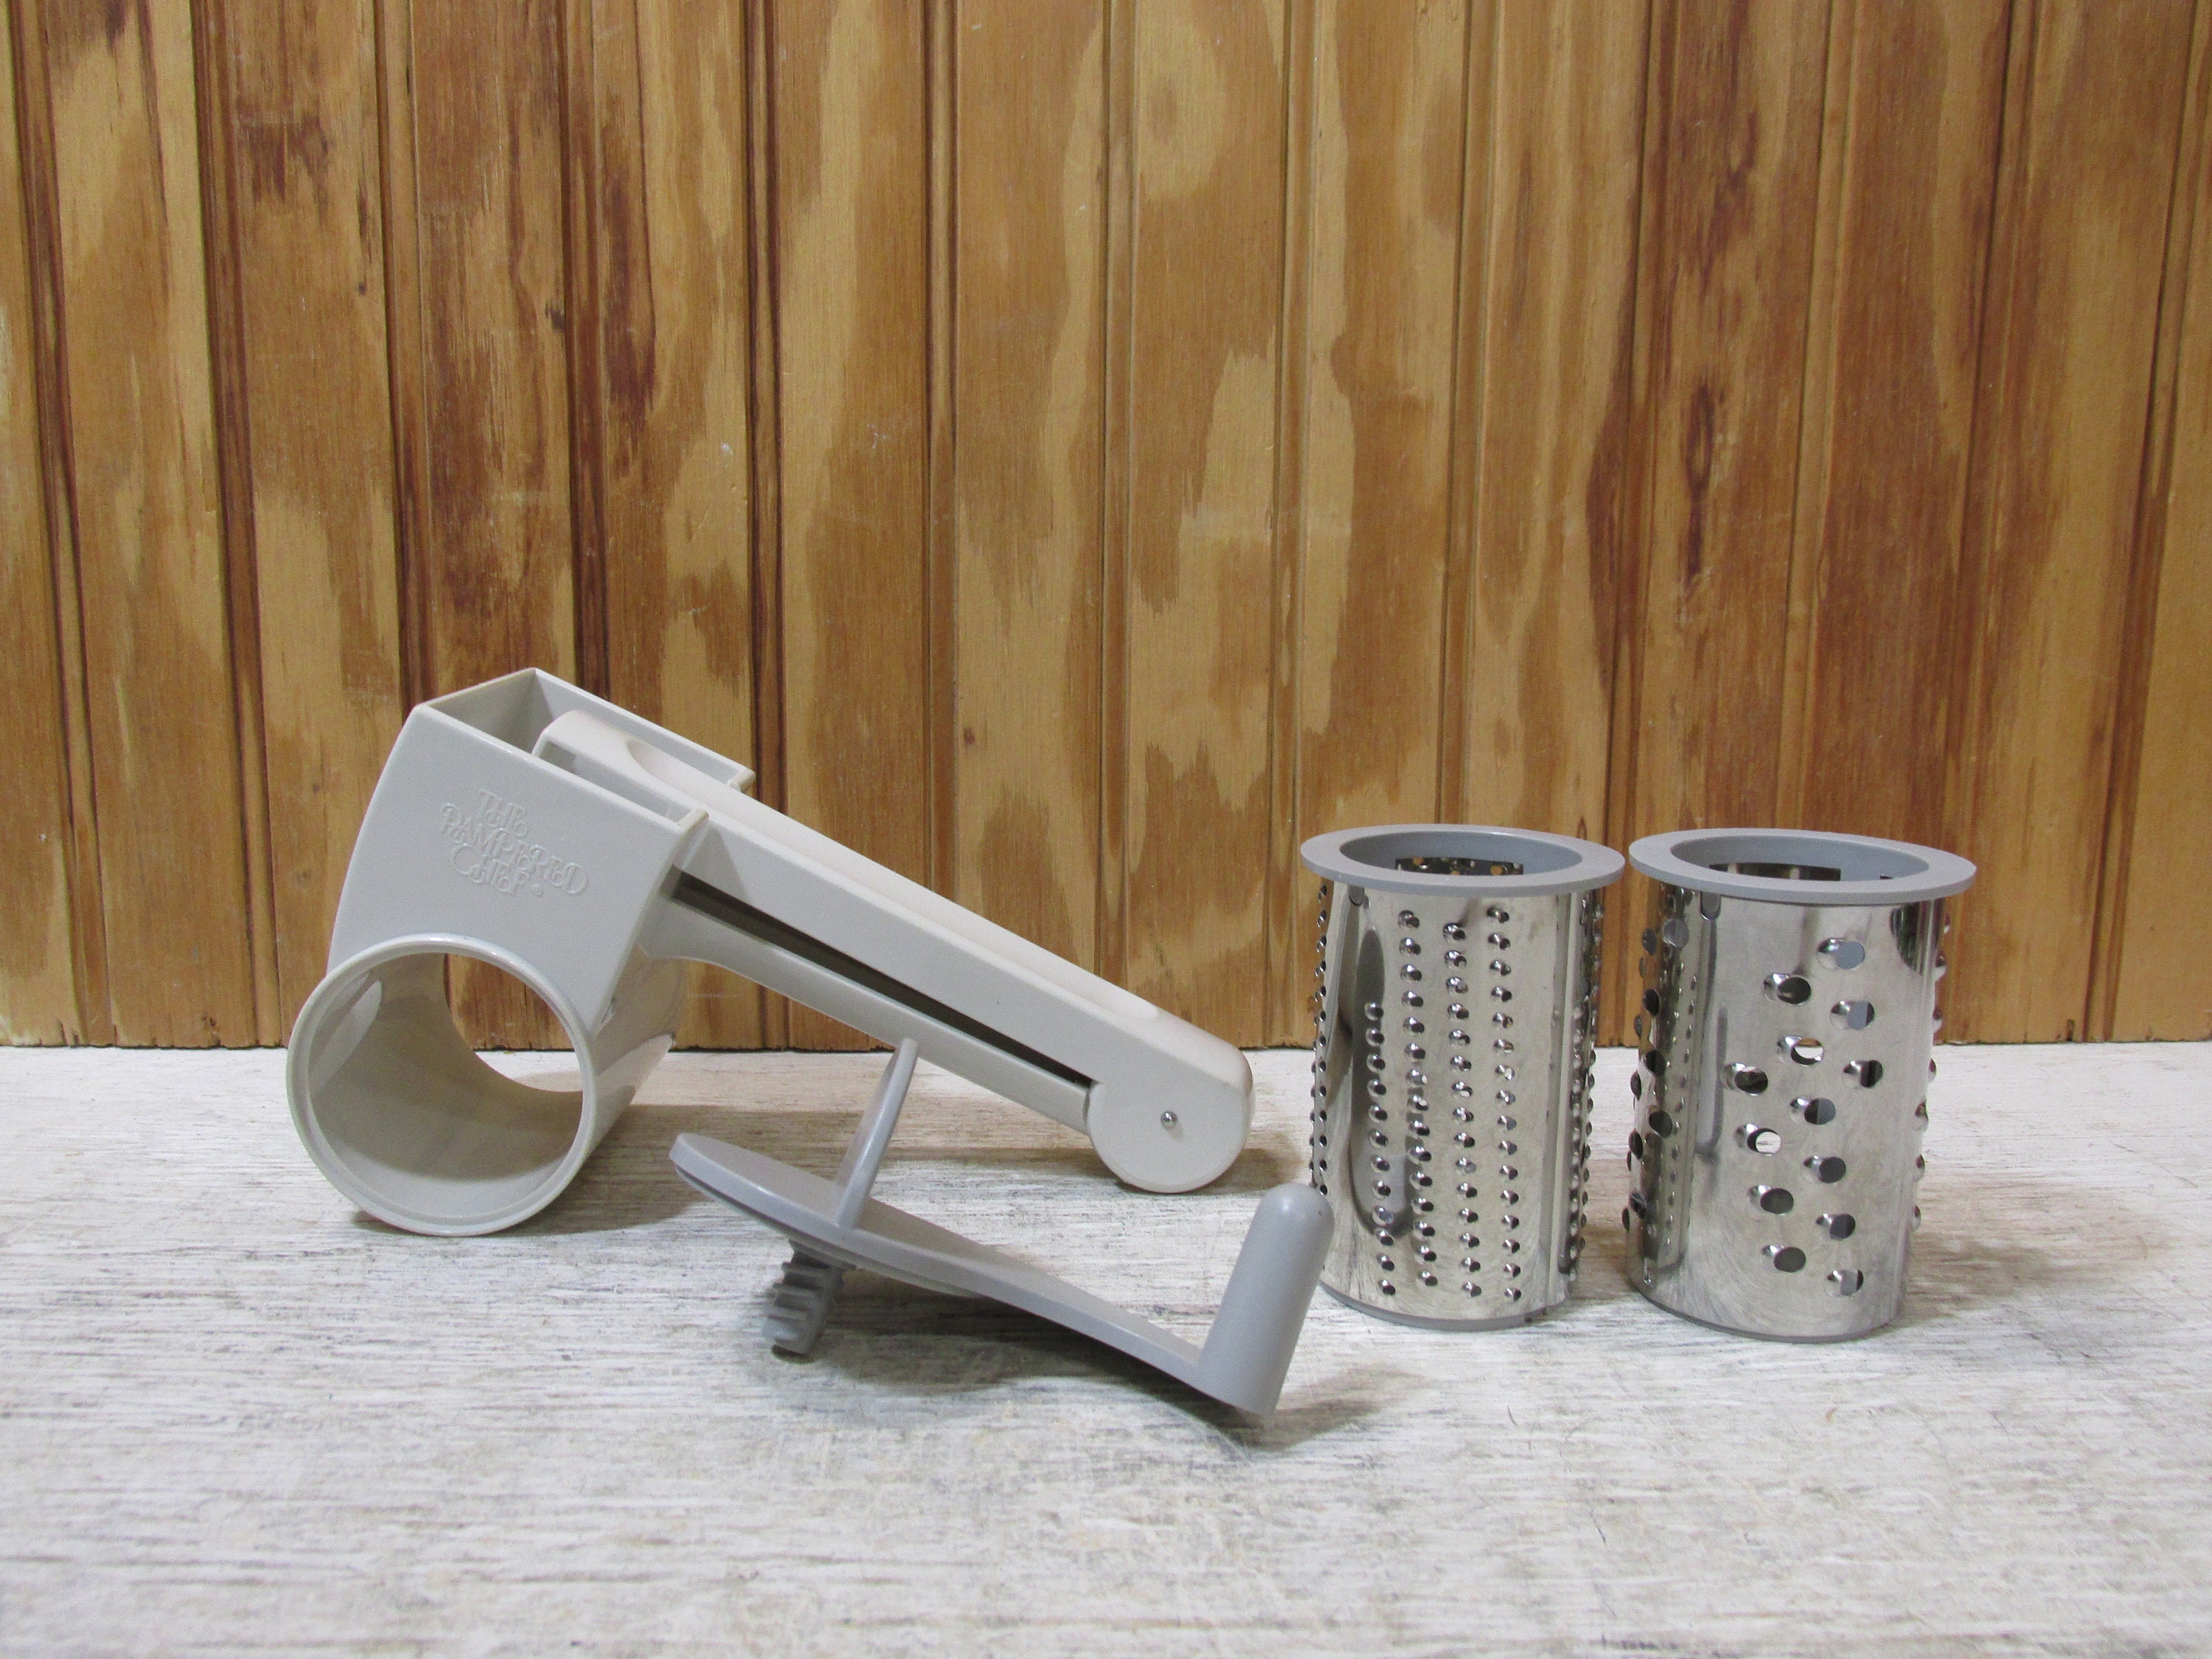  The Pampered Chef Deluxe Cheese Grater: Pampered Chef